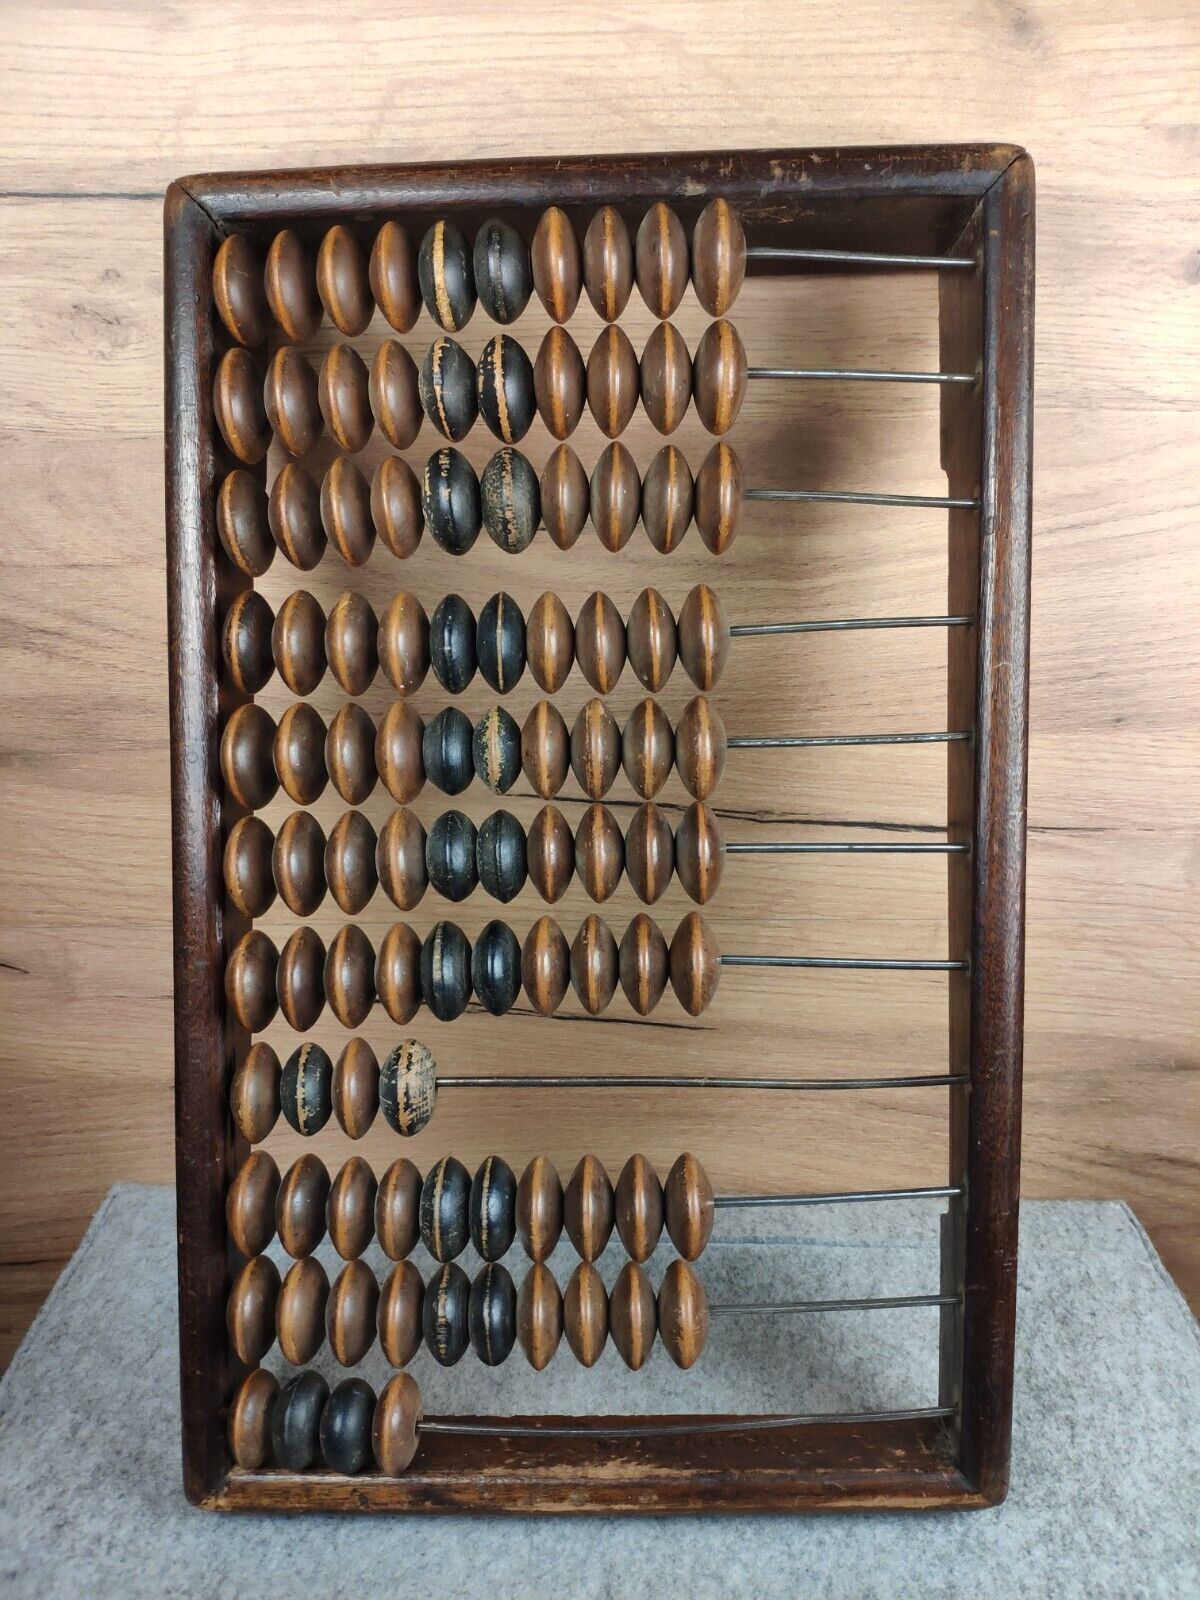 Old rare wooden Russian abacus with brass inserts 1900-1930s.Signed by the owner